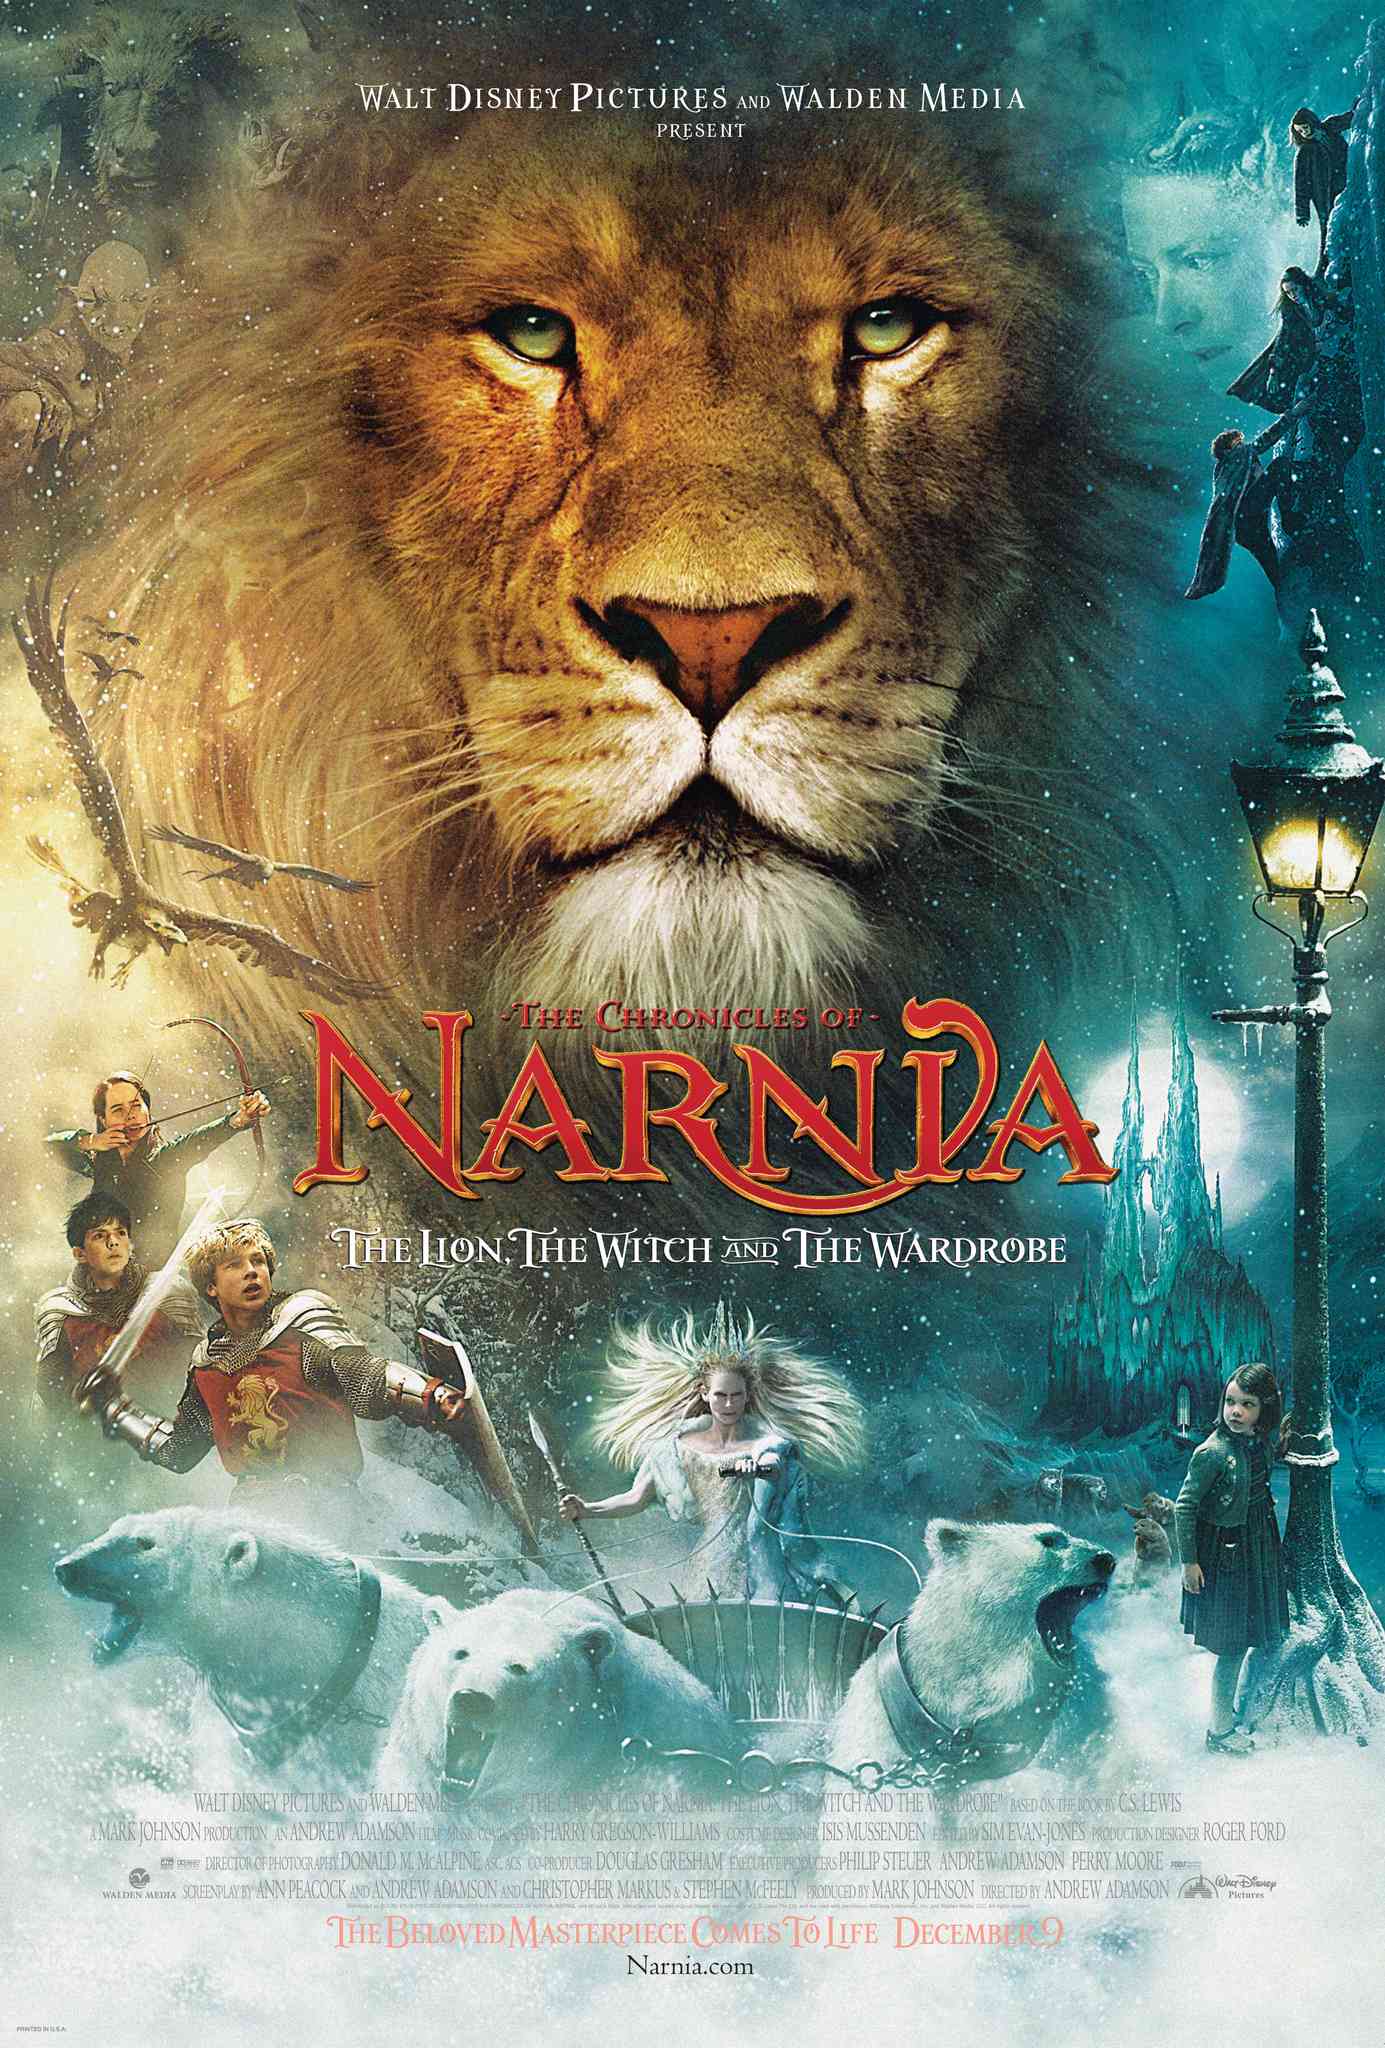 Netnaija - The Chronicles of Narnia: The Lion, The Witch and the Wardrobe (2005)